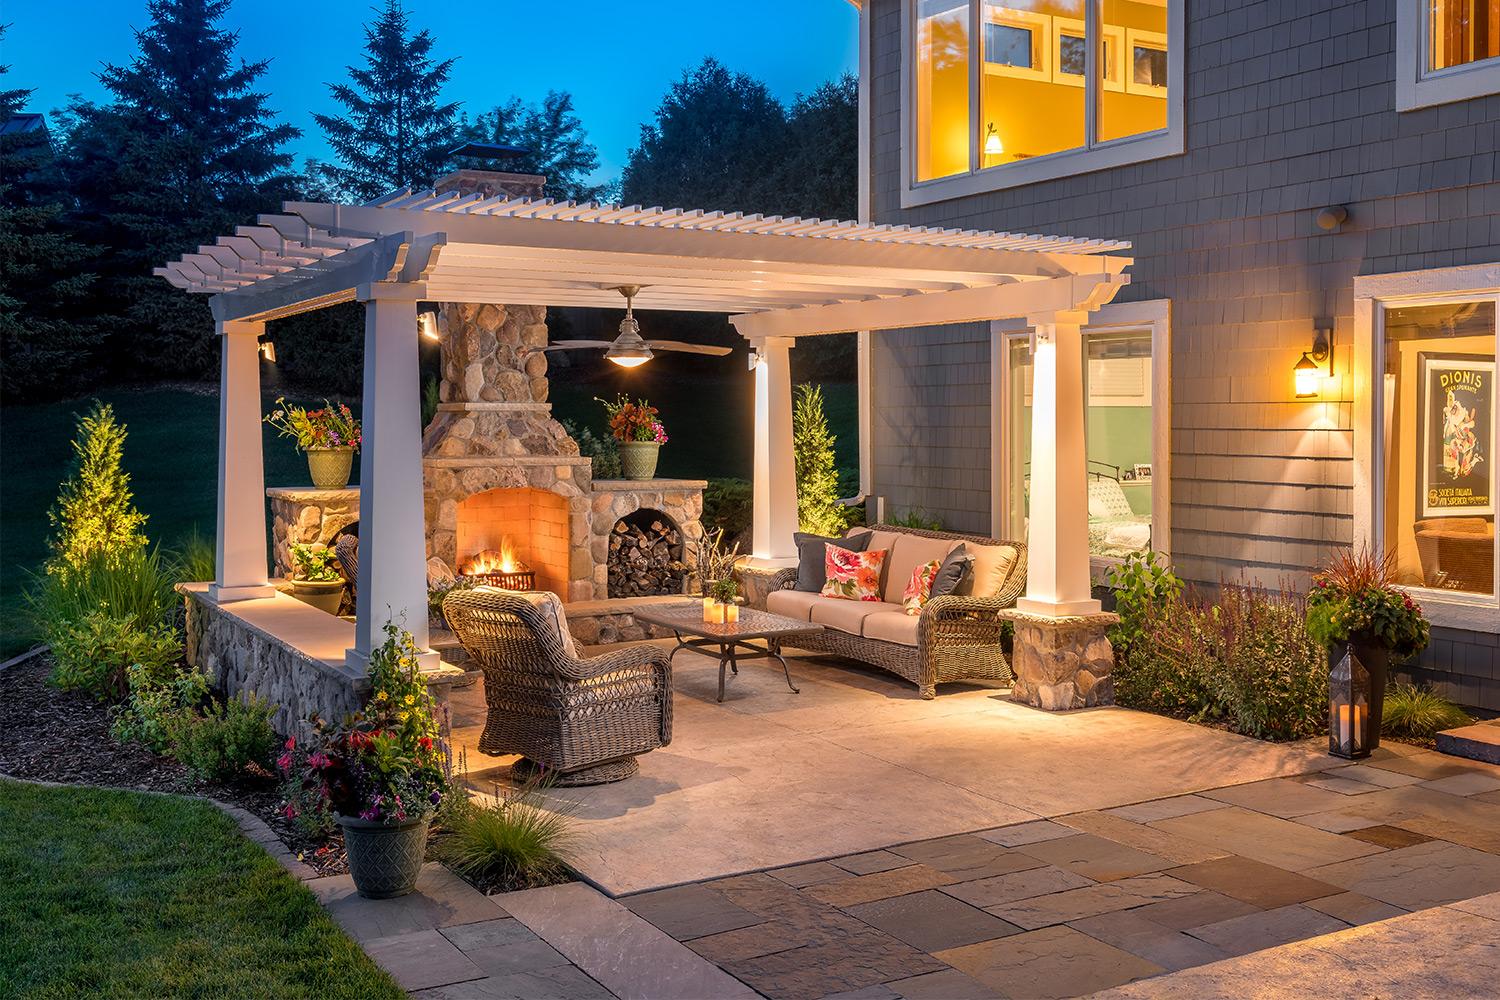 Outdoor living room patio with stone-faced fireplace underneath a white pergola at dusk